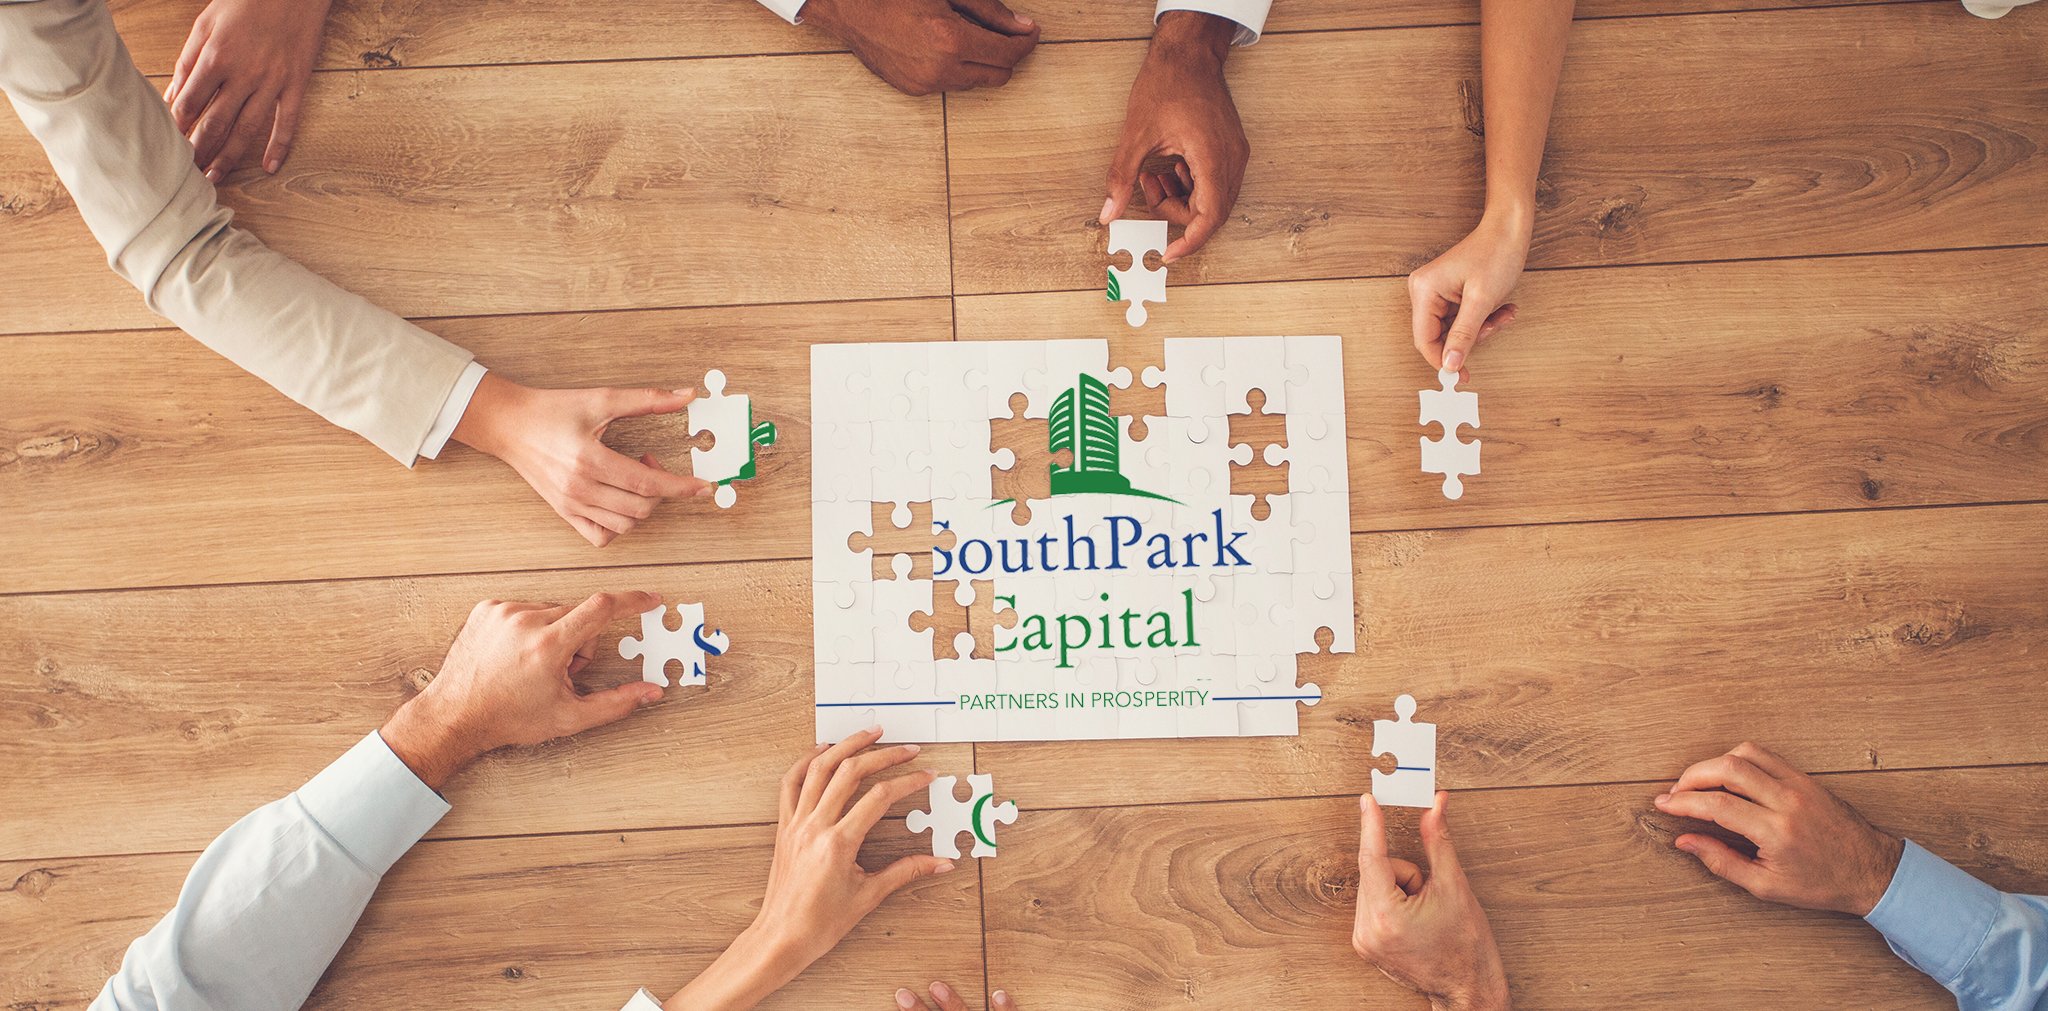 About SouthPark Capital